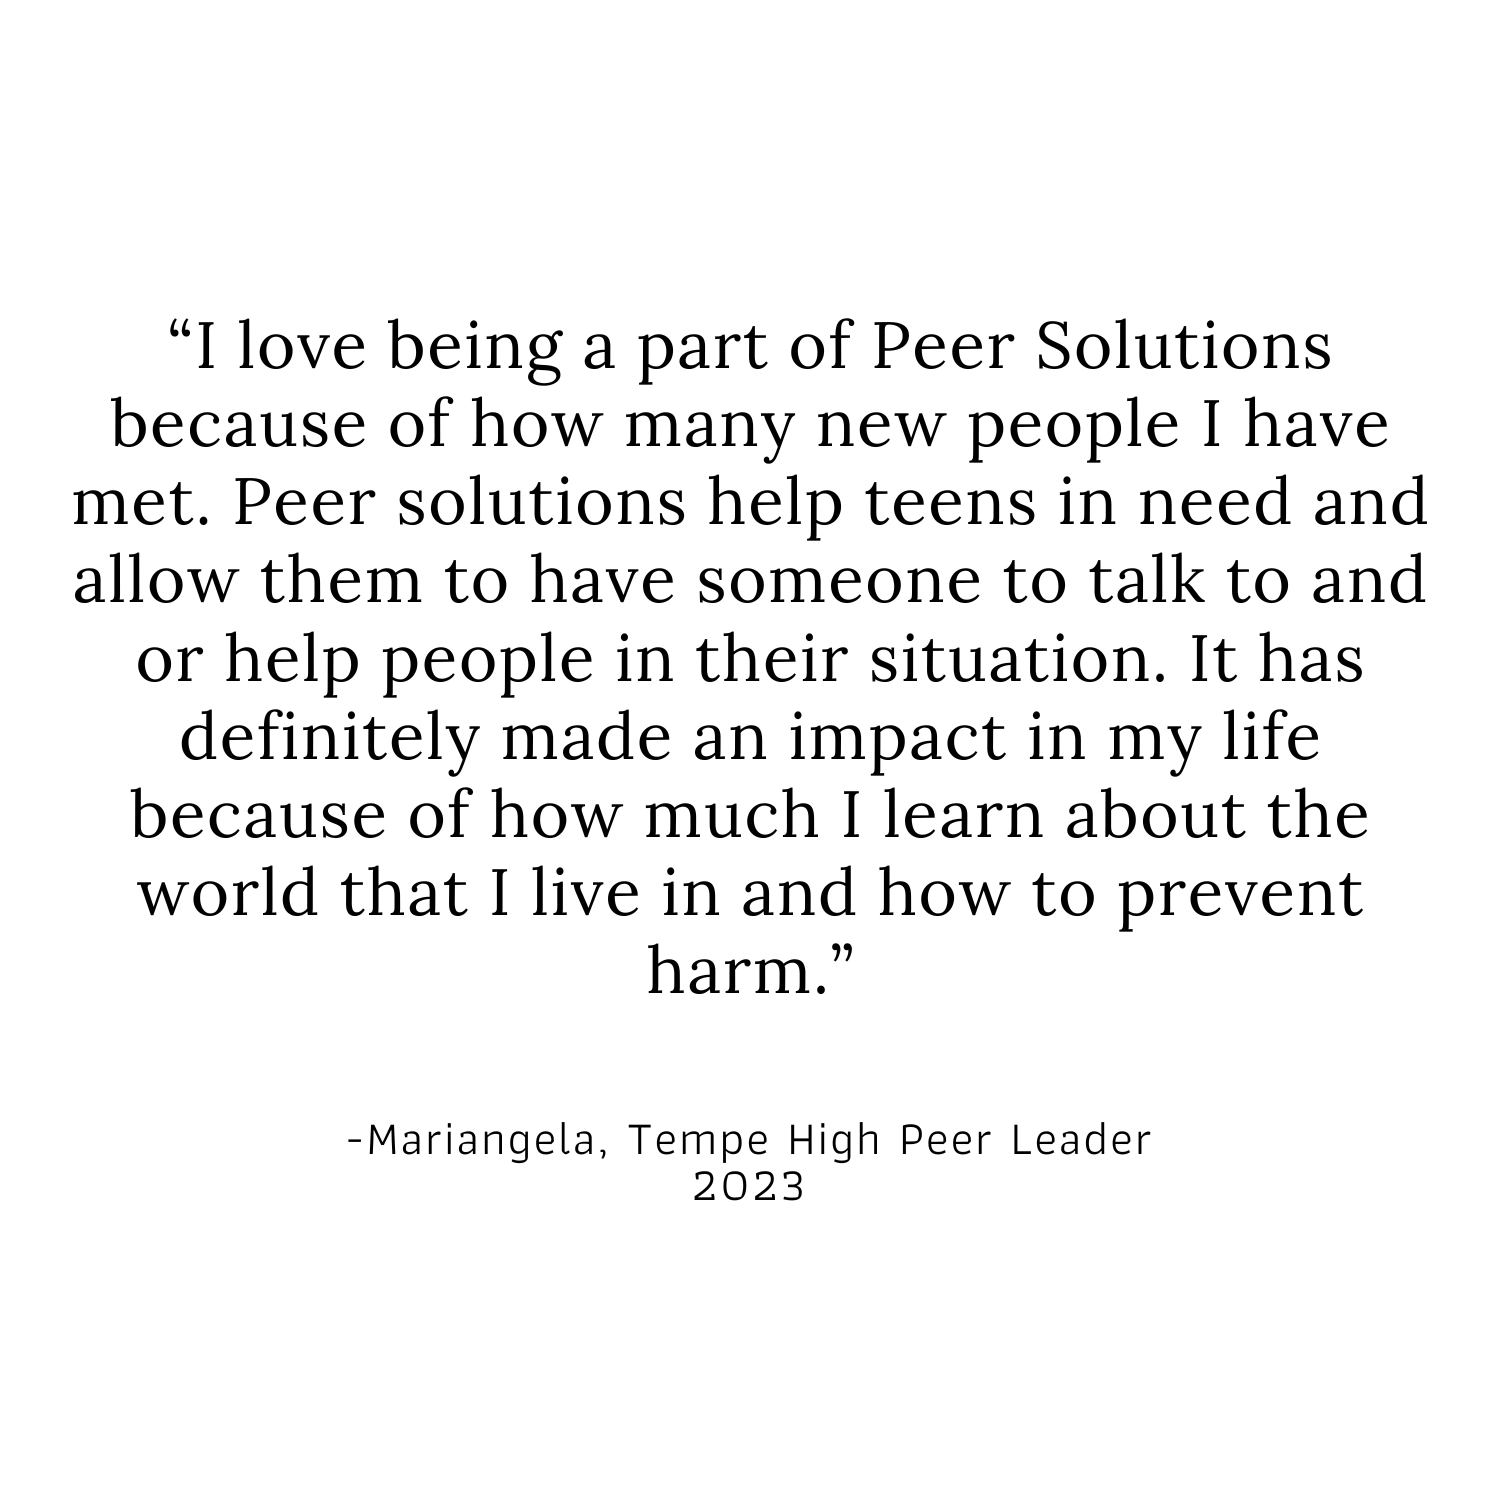 i love being part of peer solutions because of how many people i have.